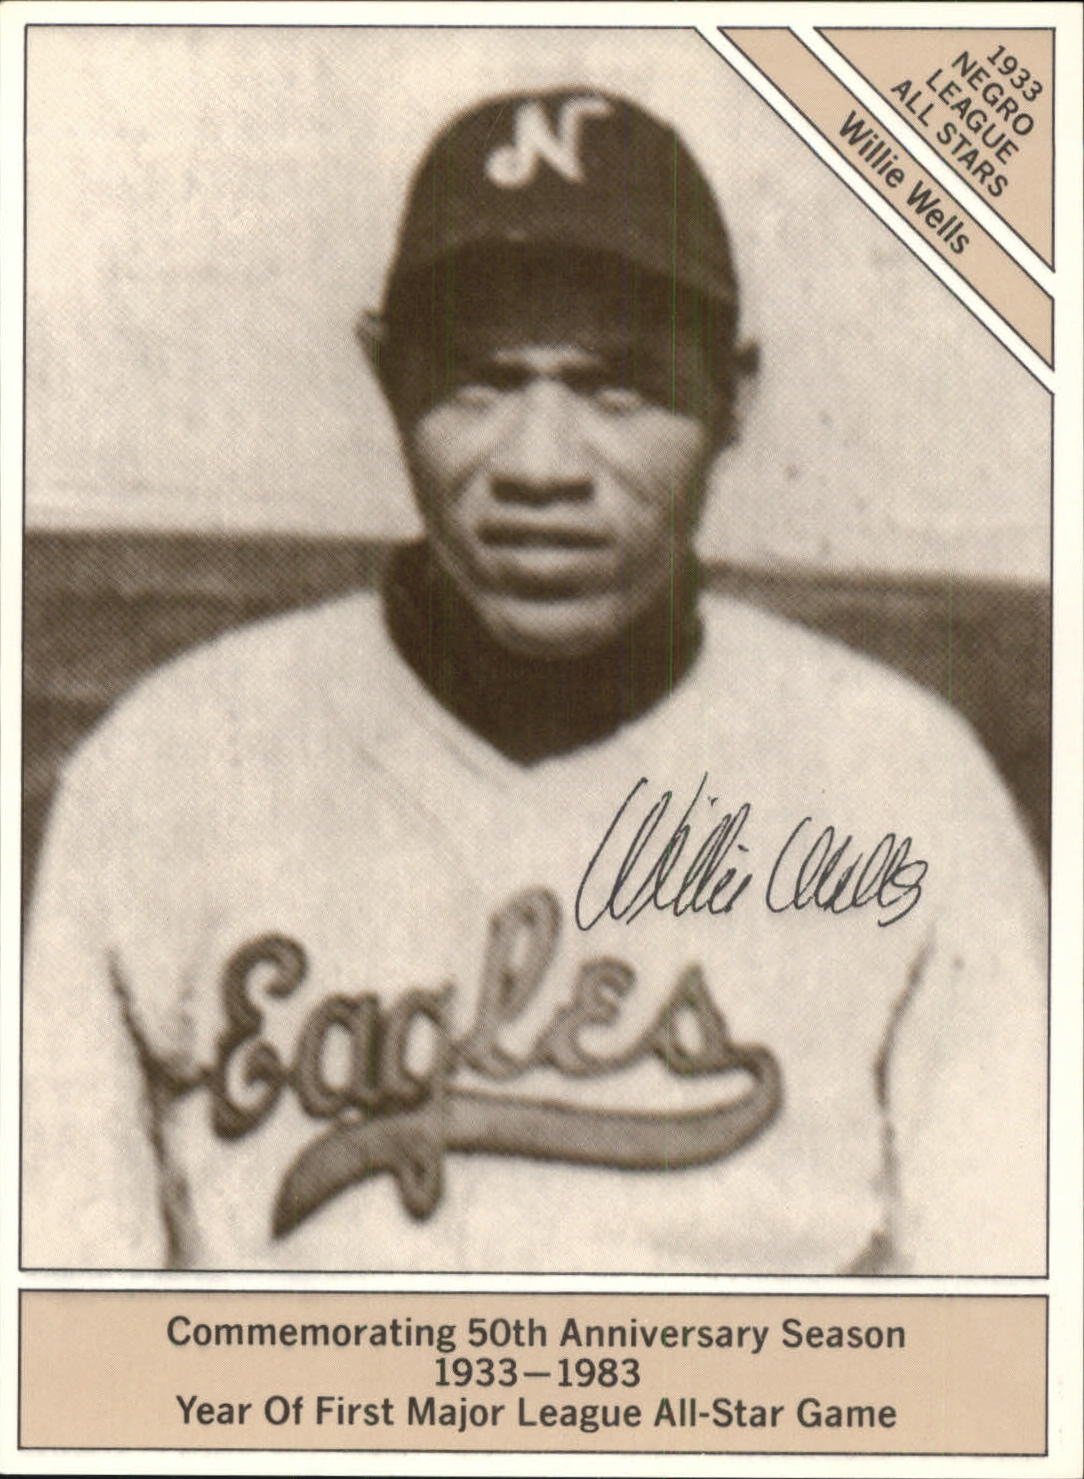  Willie Wells player image